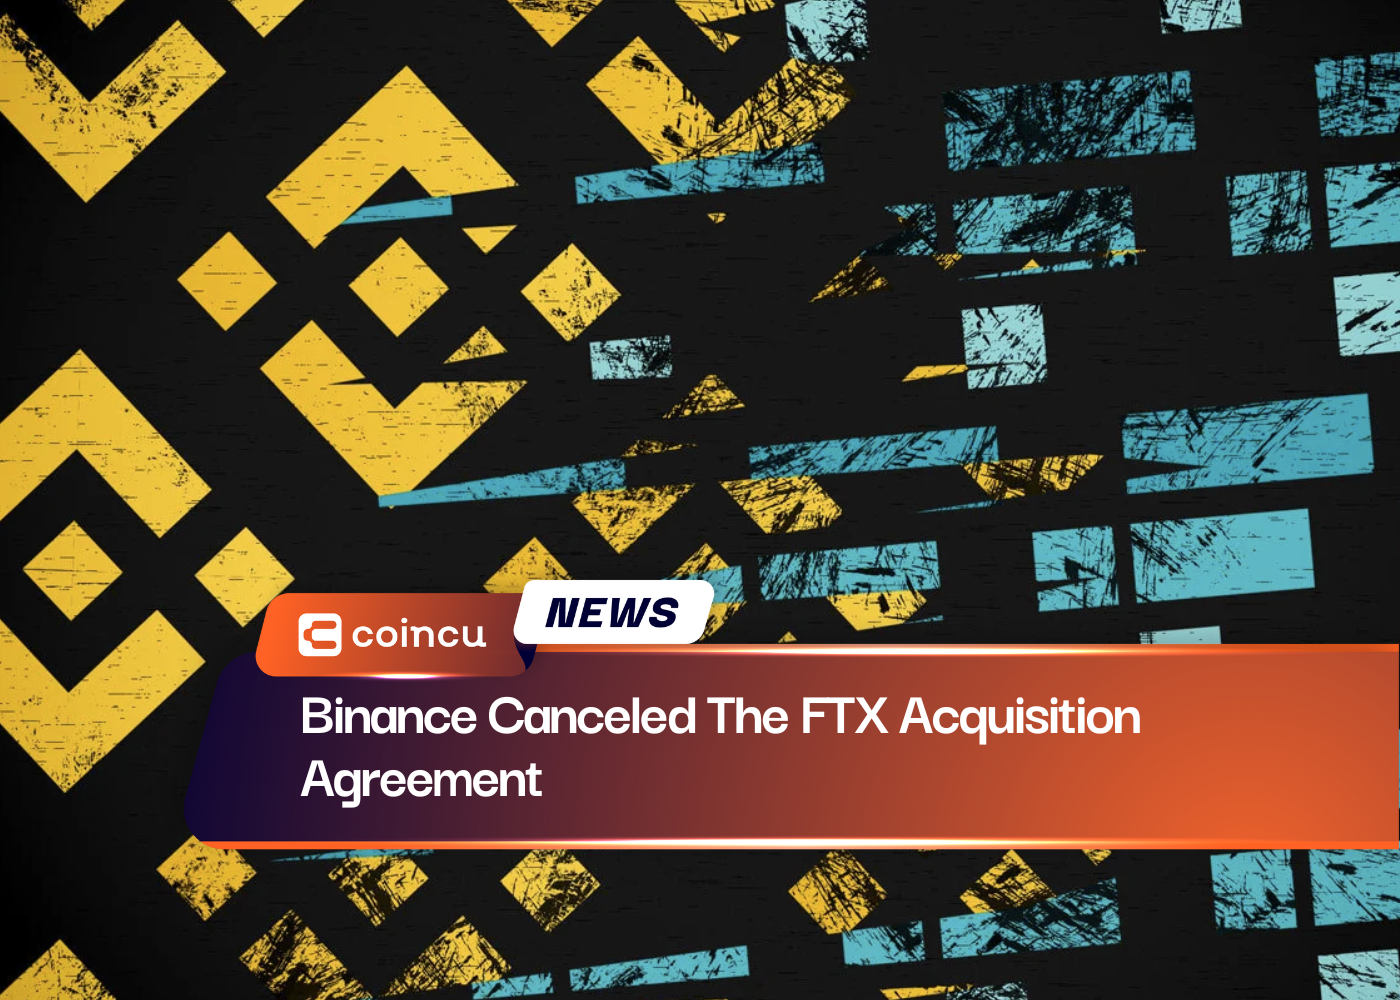 Binance Canceled The FTX Acquisition Agreement